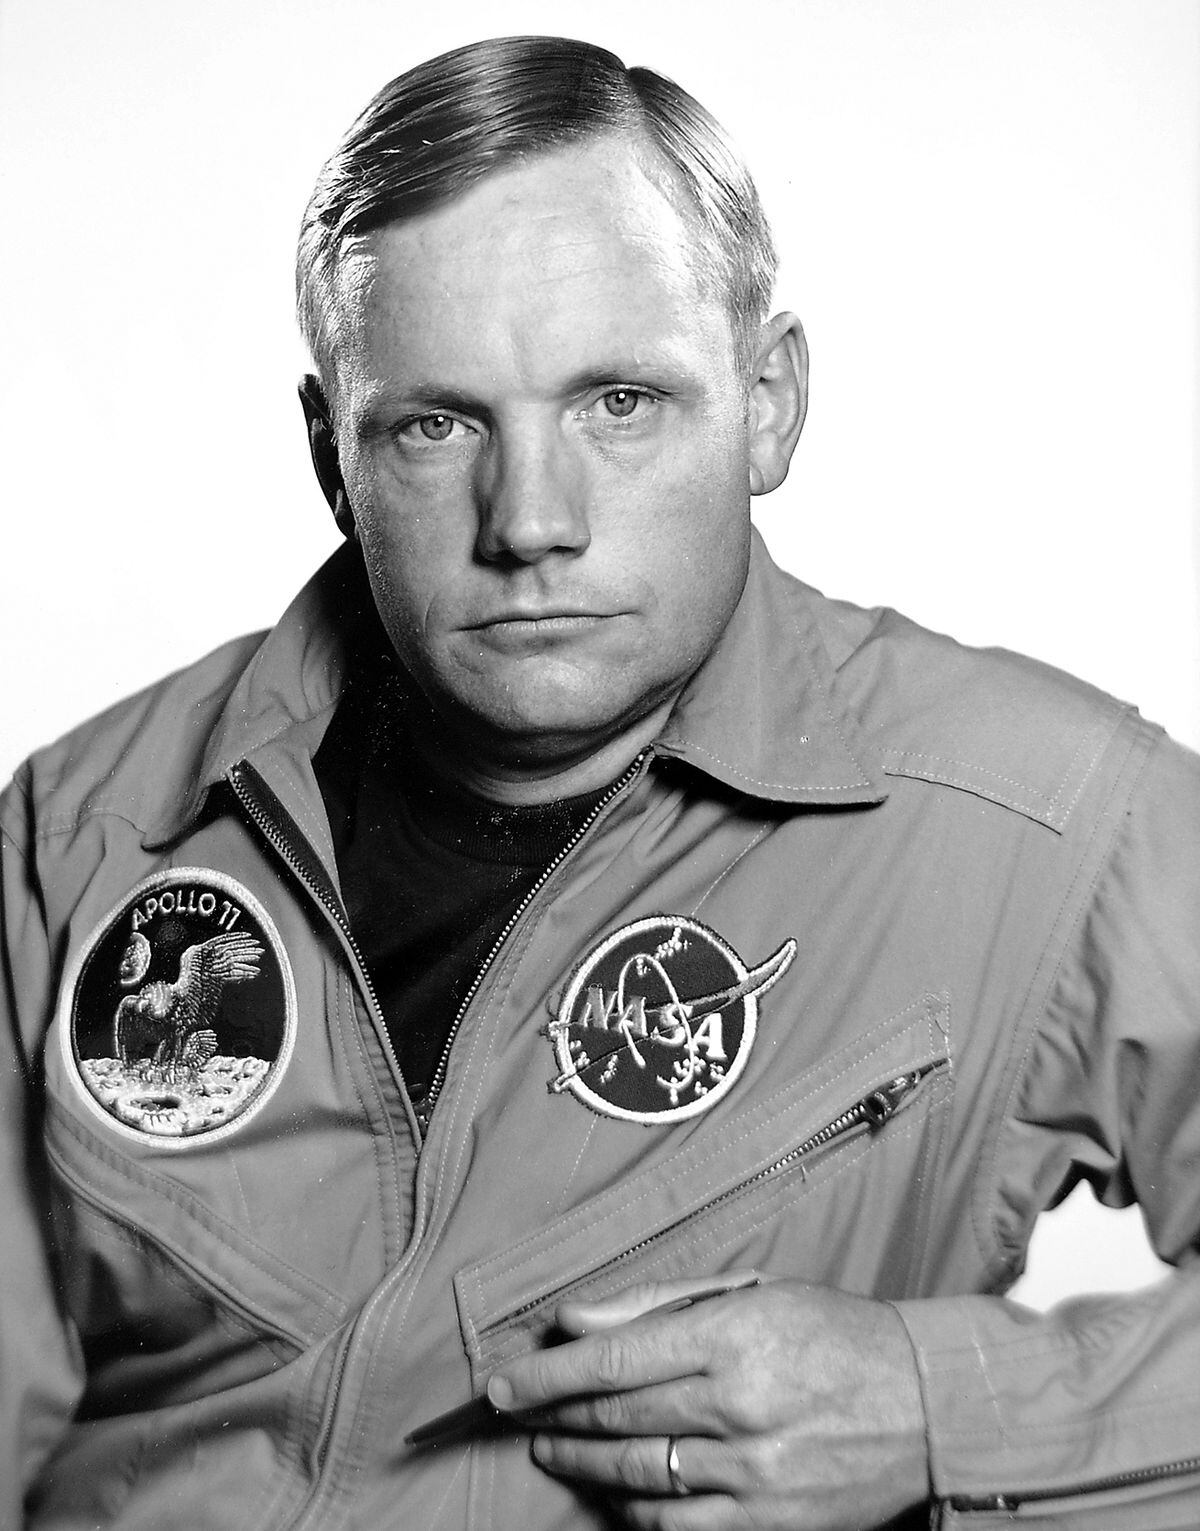 Neil Armstrong, the first man to walk on the moon